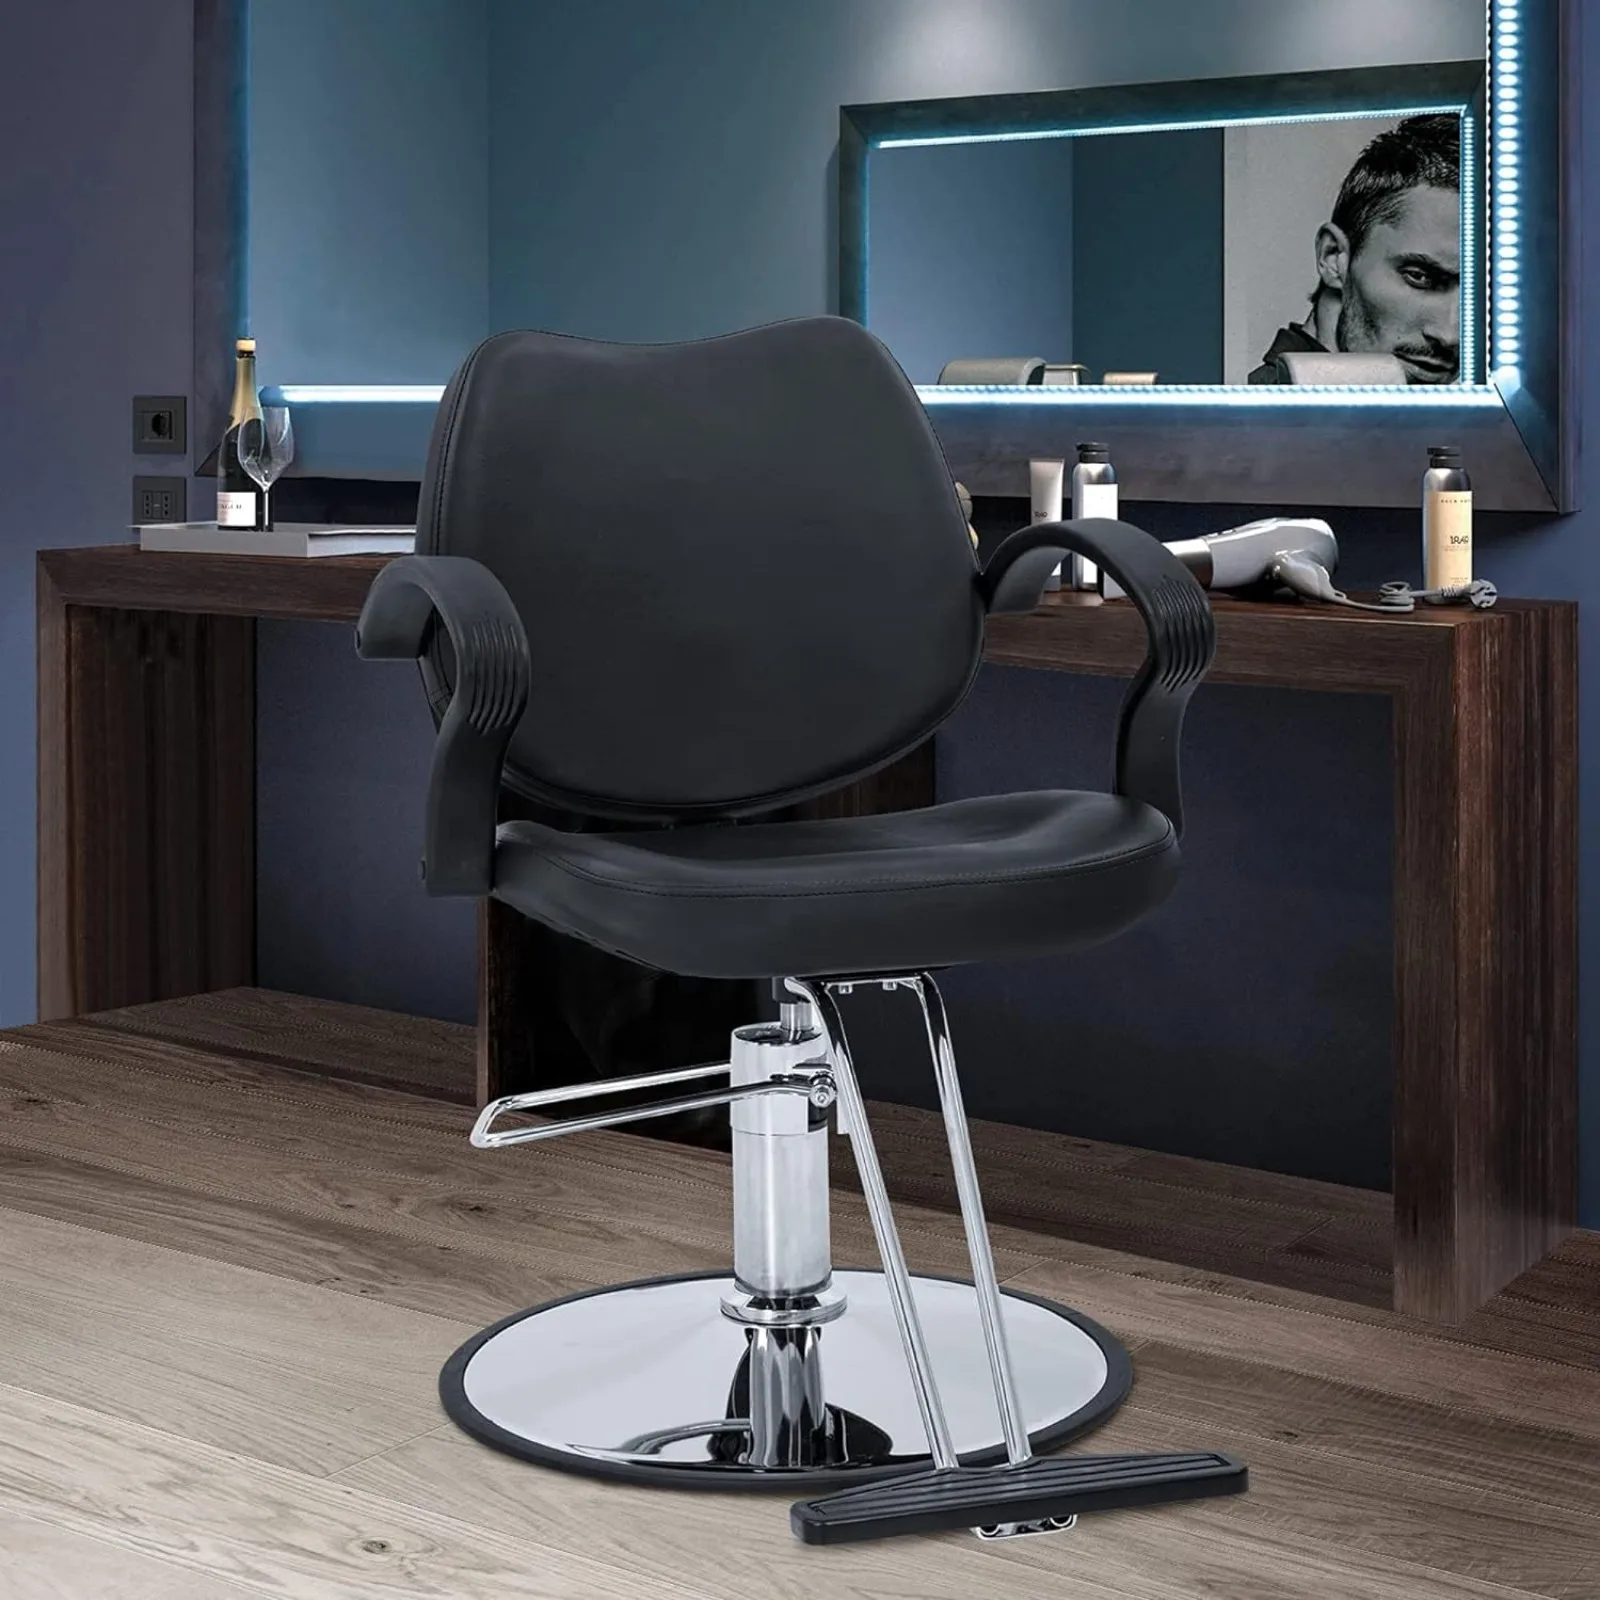 

US 360 Degrees Rolling Swivel Barber Salon Styling Adjustable Hydraulic Beauty Shampoo Hairdressing Chair for Men and Women Haih